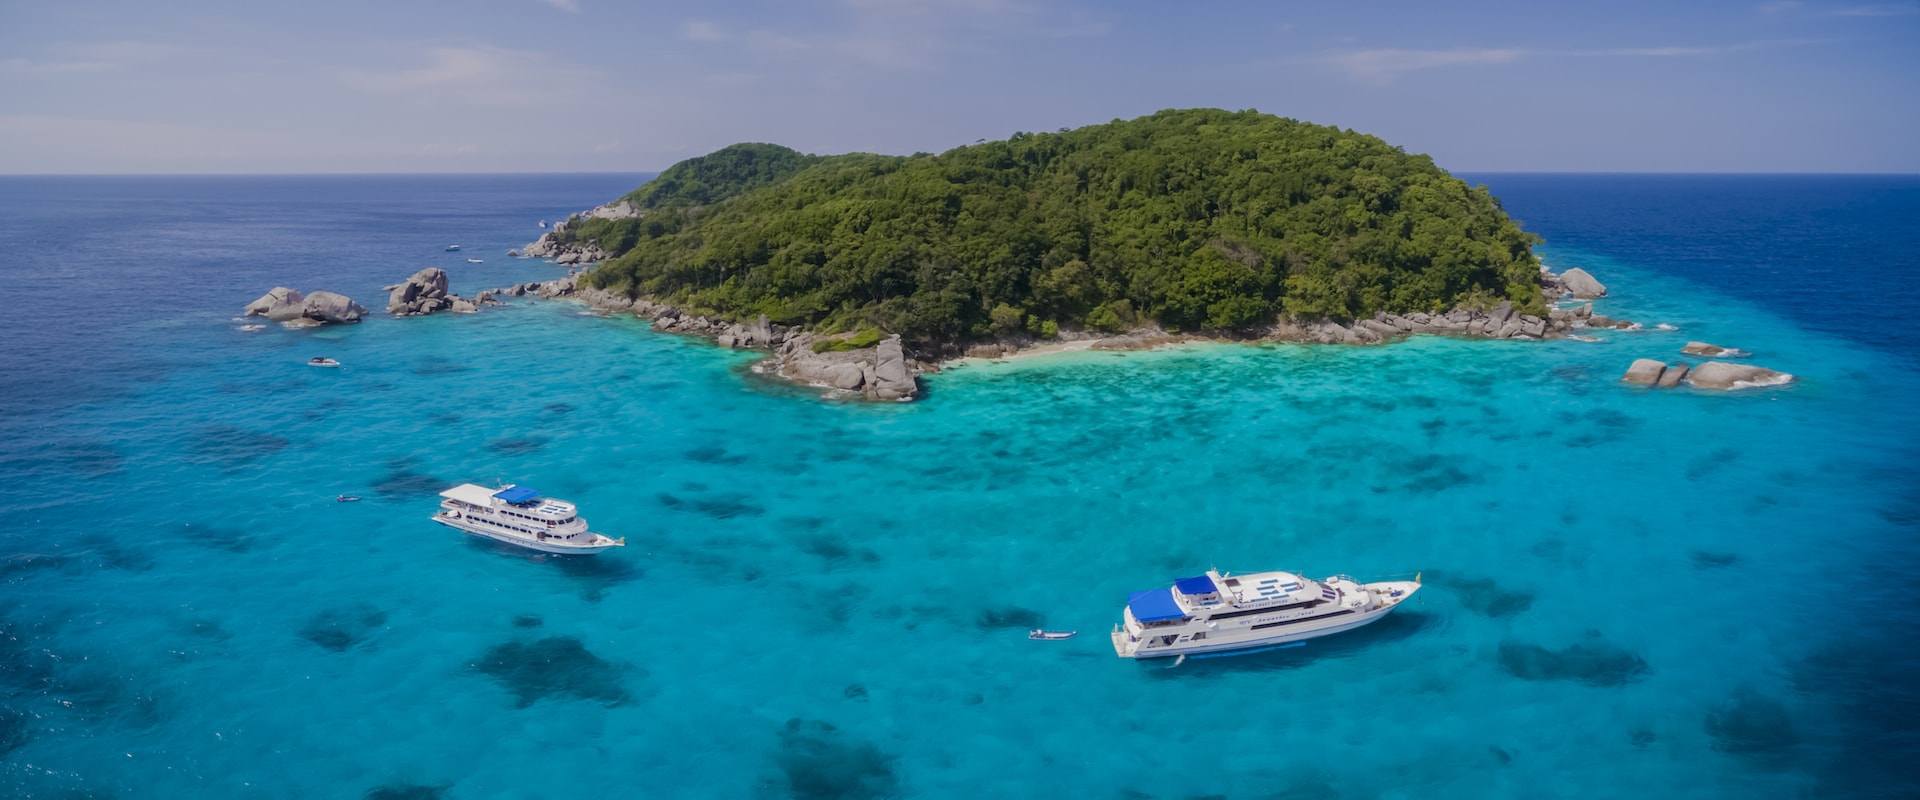 Immersioni alle Isole Similan